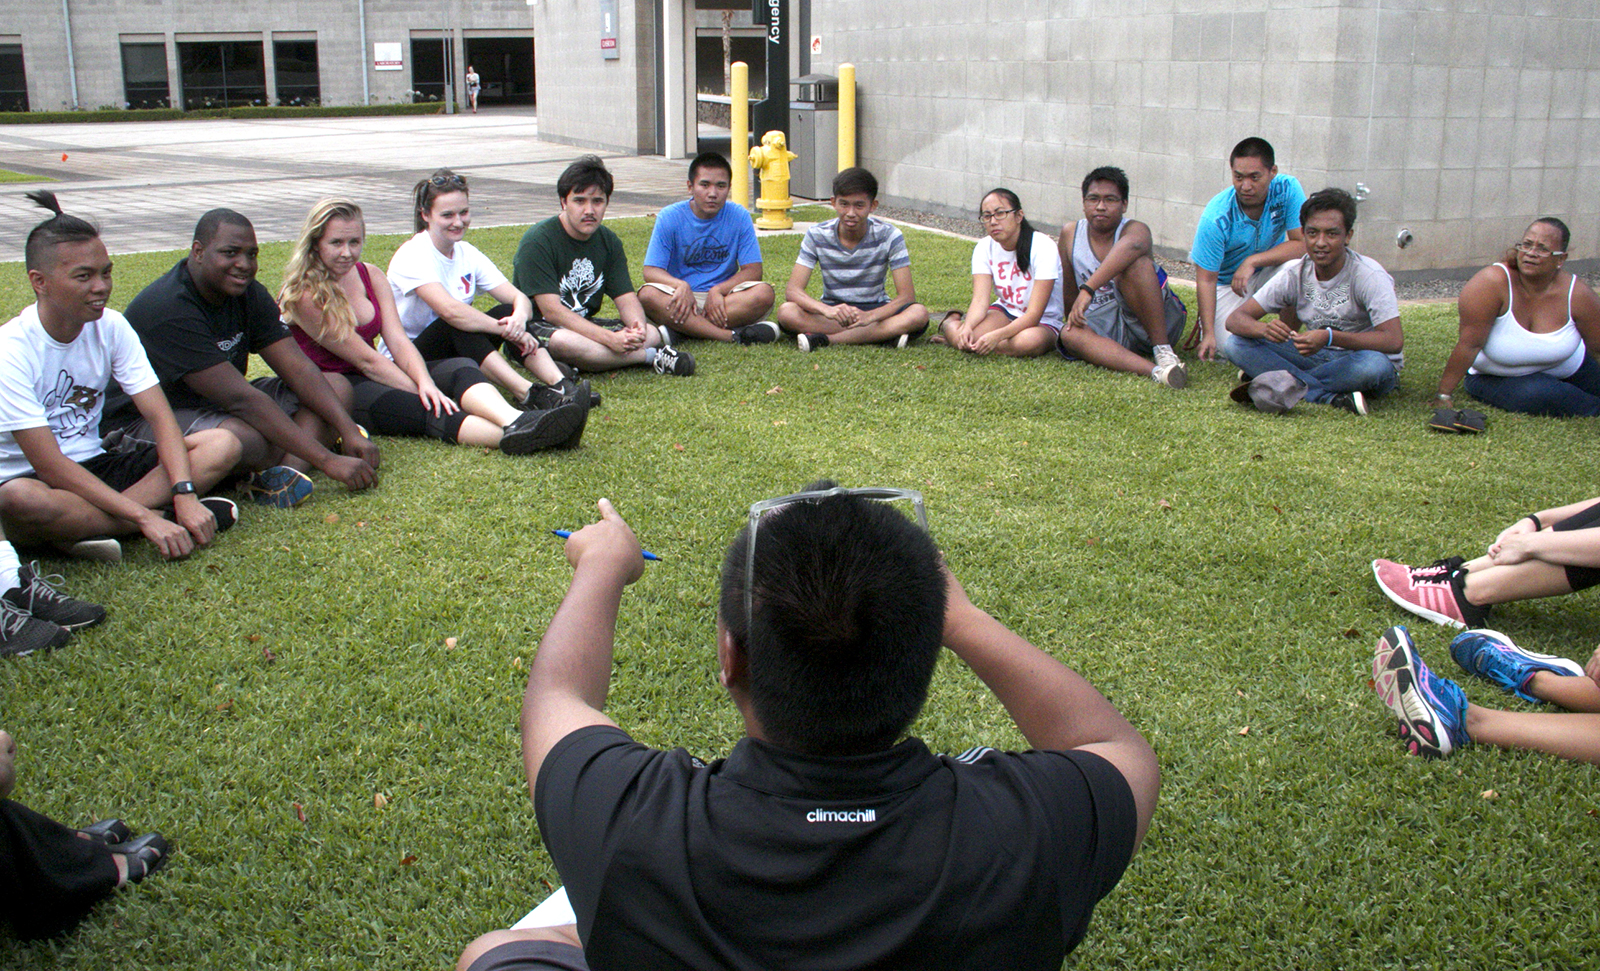 A instructor leading a large group sitting in a circle in the grass.